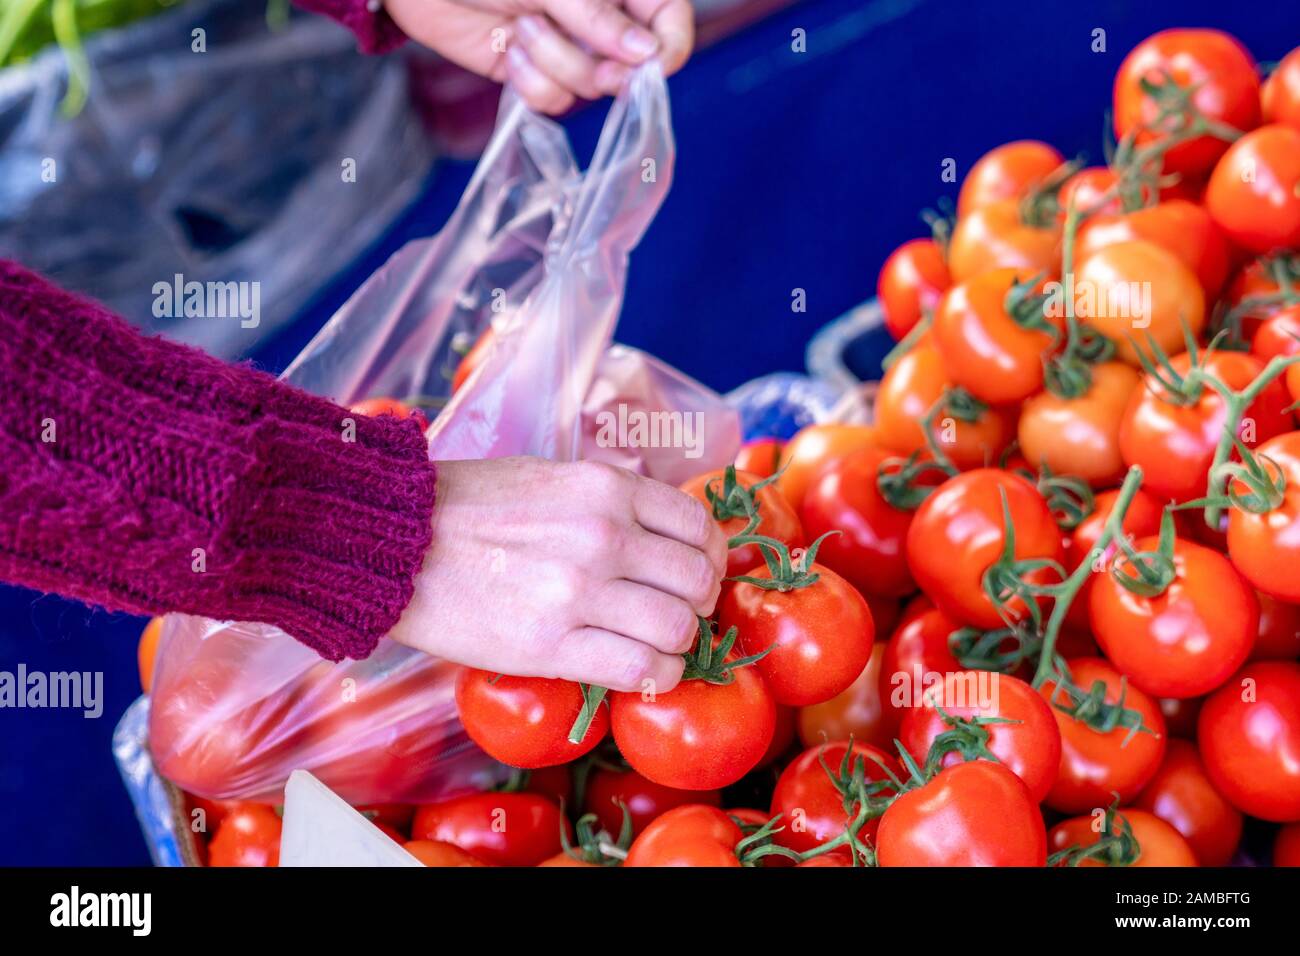 Choosing very delicious vegetable tomato from a pile in a grocery Stock Photo